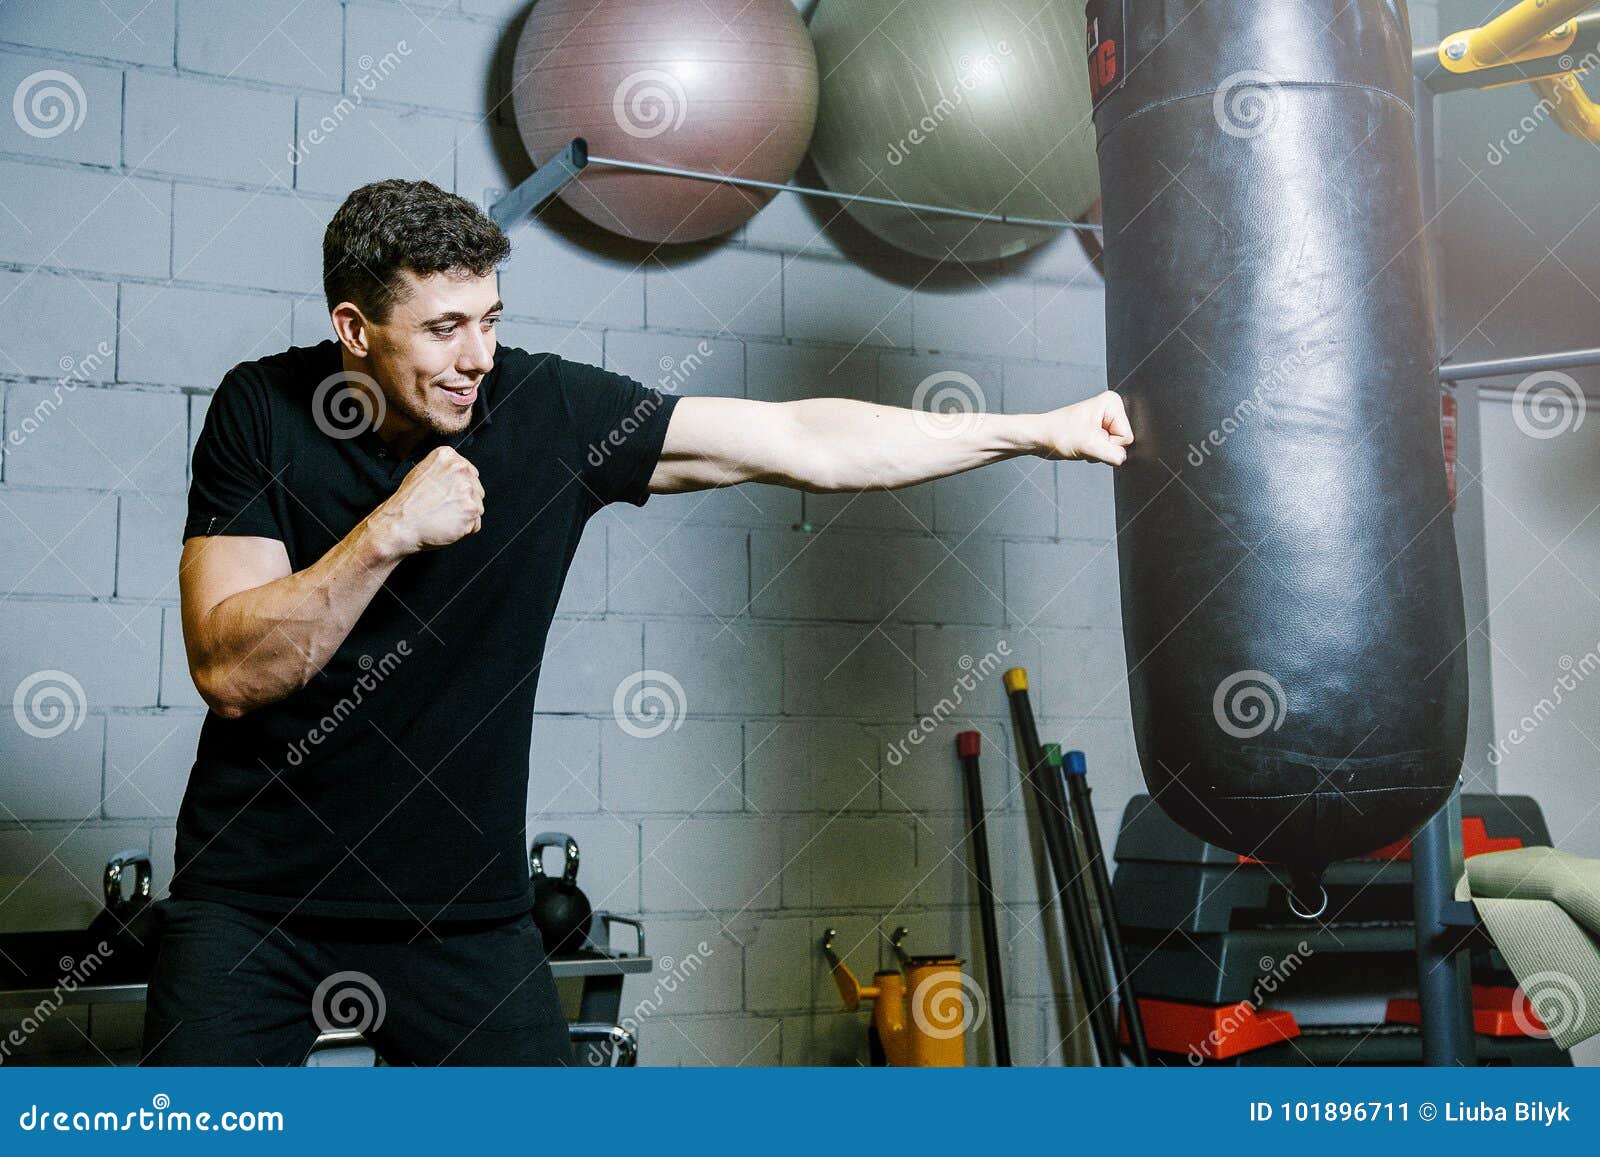 Personal Boxing Trainer. Guy Trains with Boxing Pear Stock Image ...